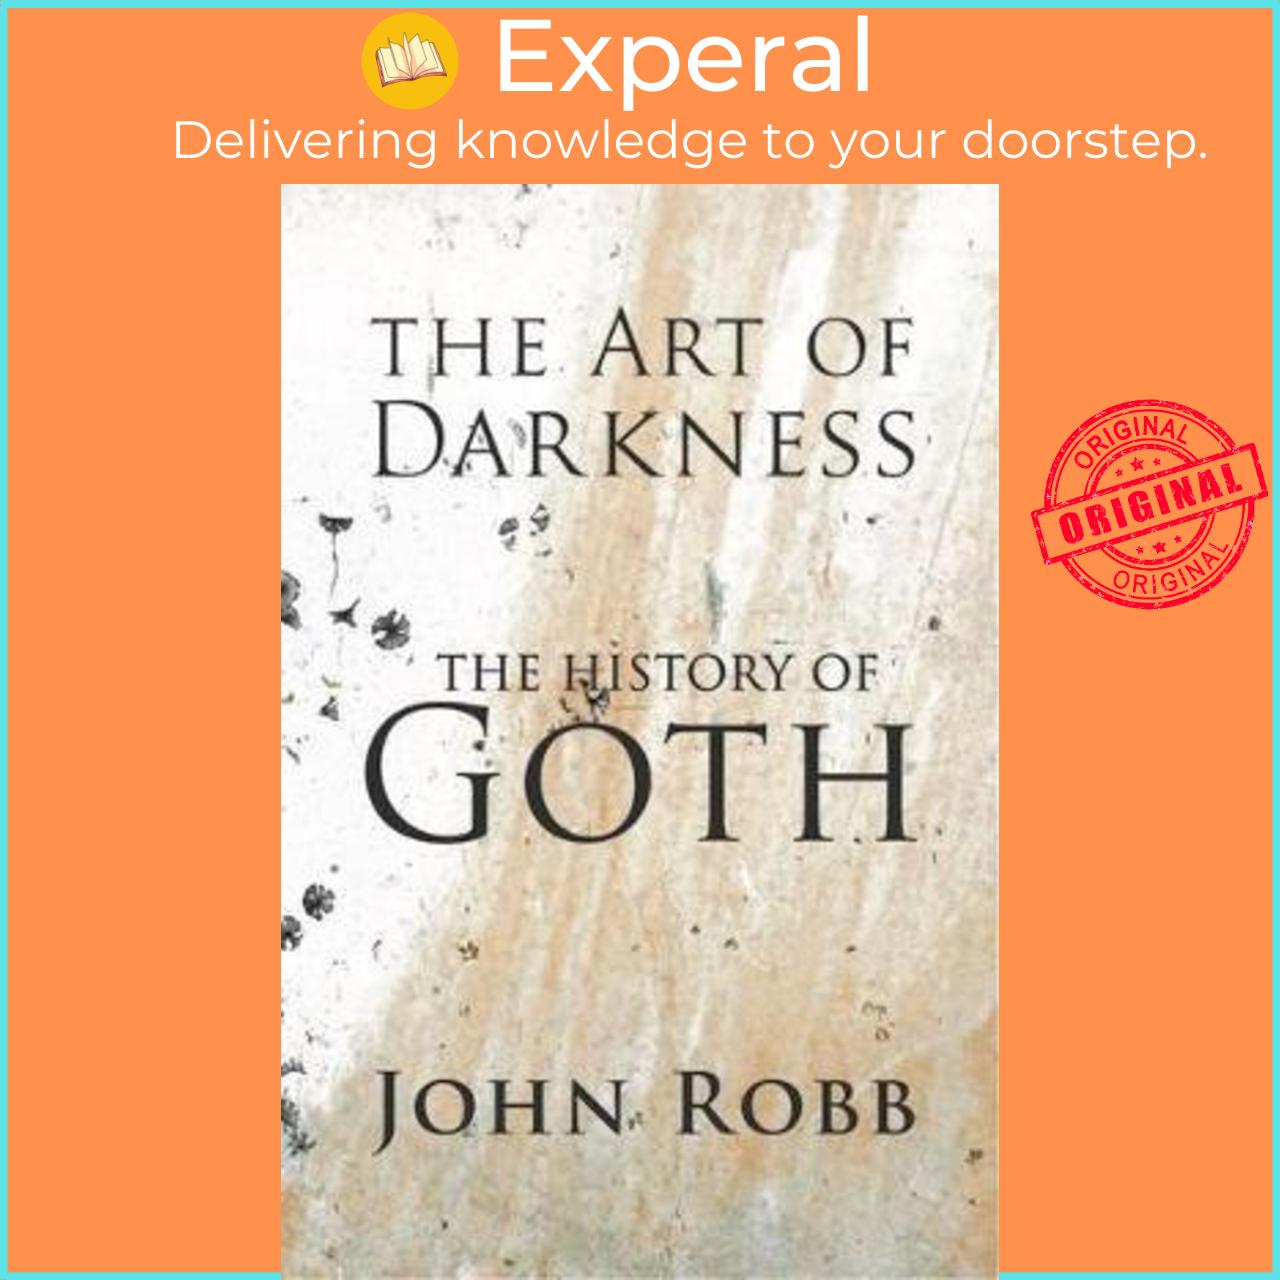 Sách - The Art of Darkness : The History of Goth by John Robb (UK edition, paperback)